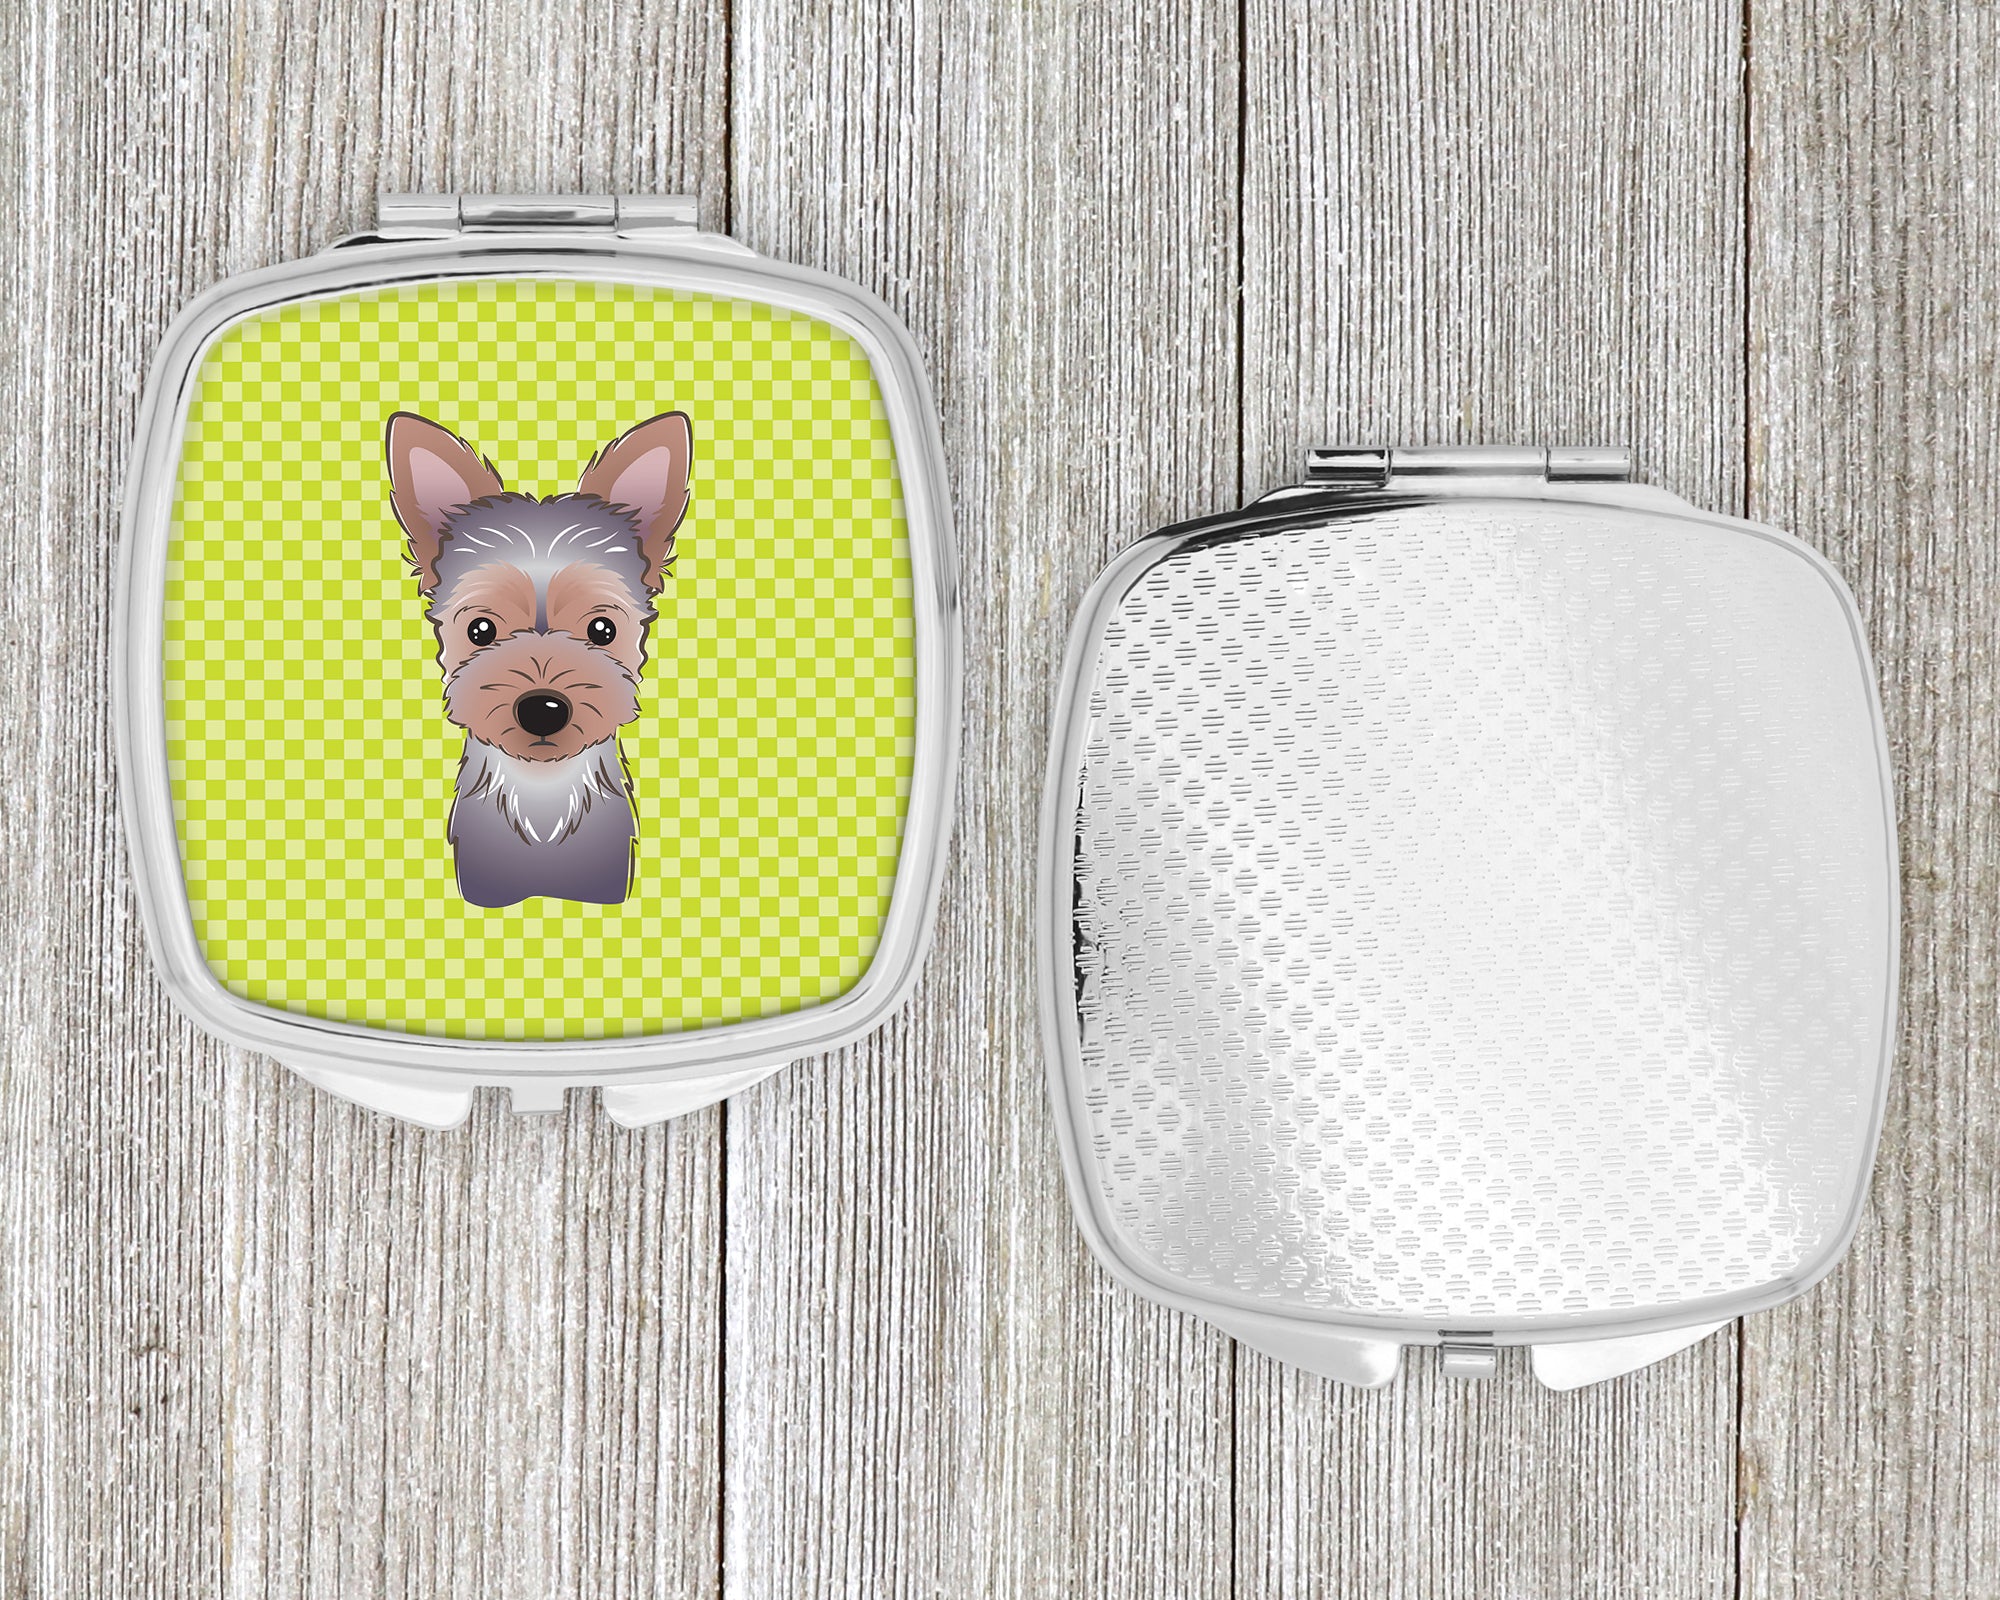 Checkerboard Lime Green Yorkie Puppy Compact Mirror BB1294SCM  the-store.com.